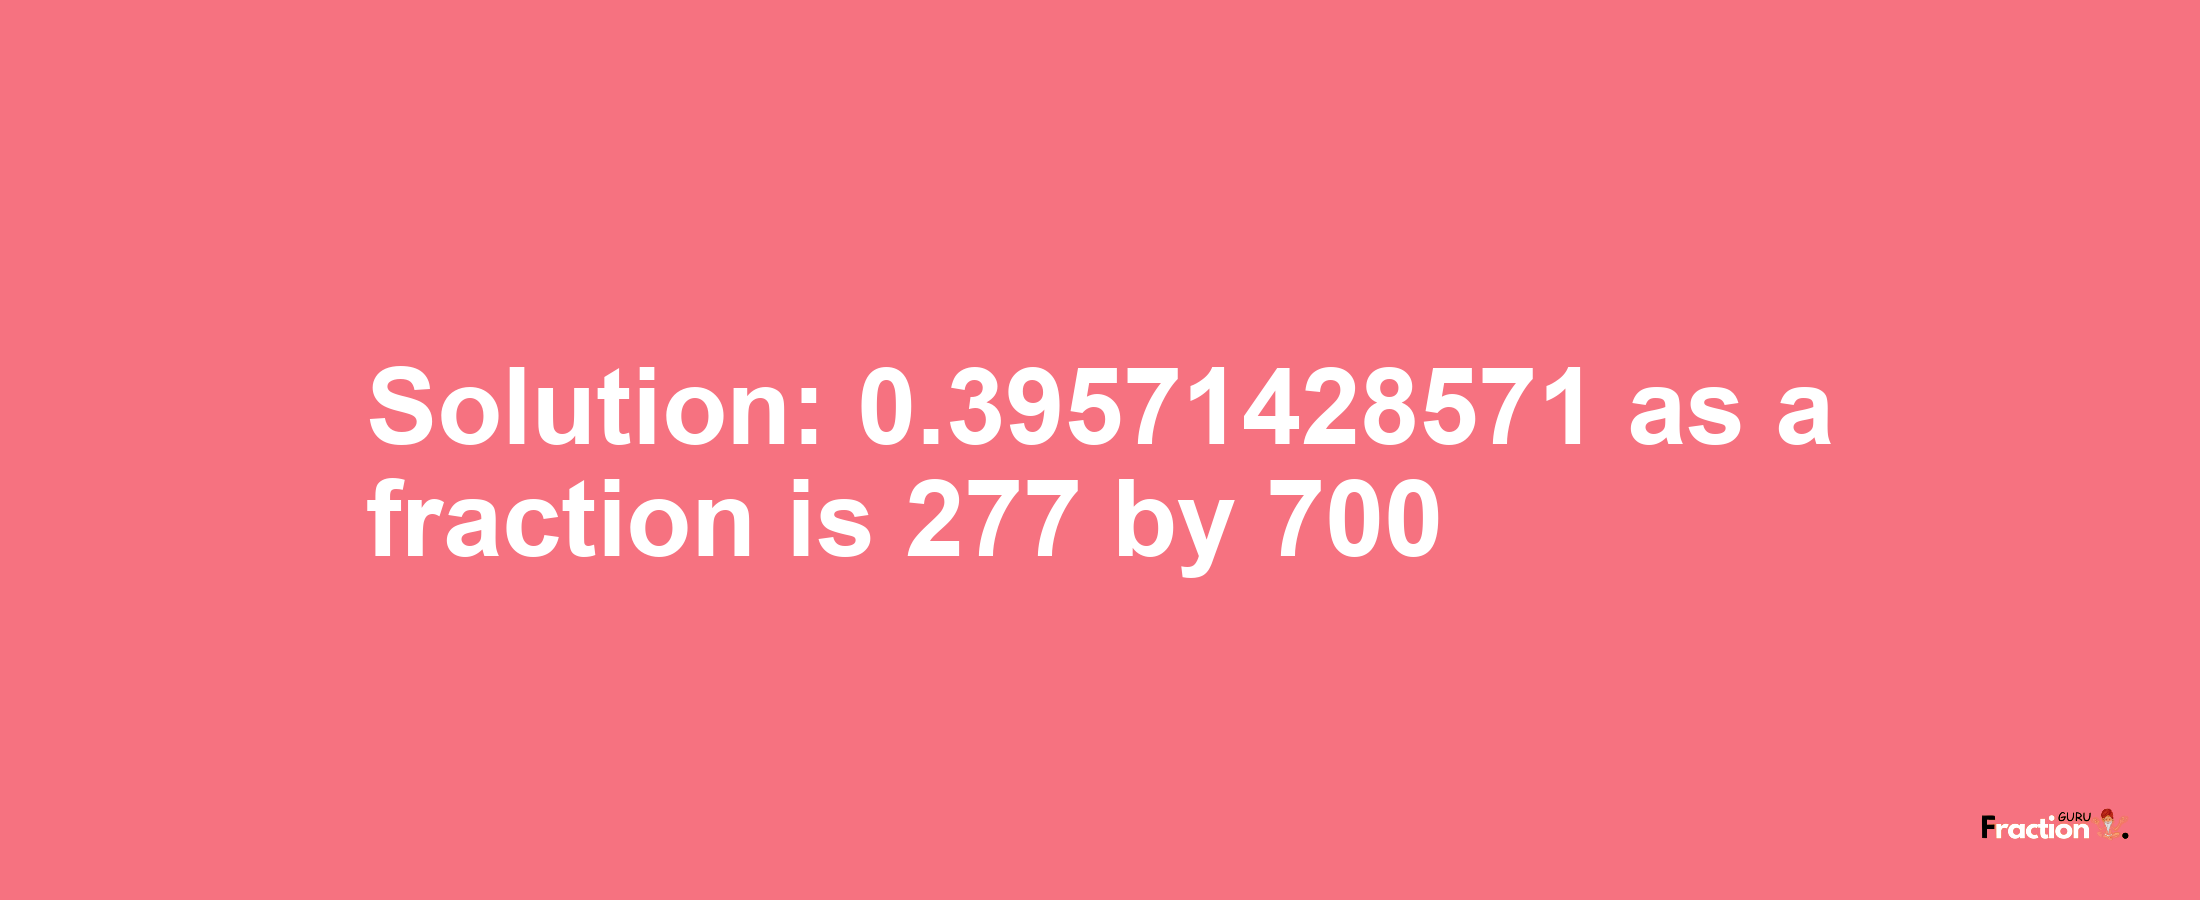 Solution:0.39571428571 as a fraction is 277/700